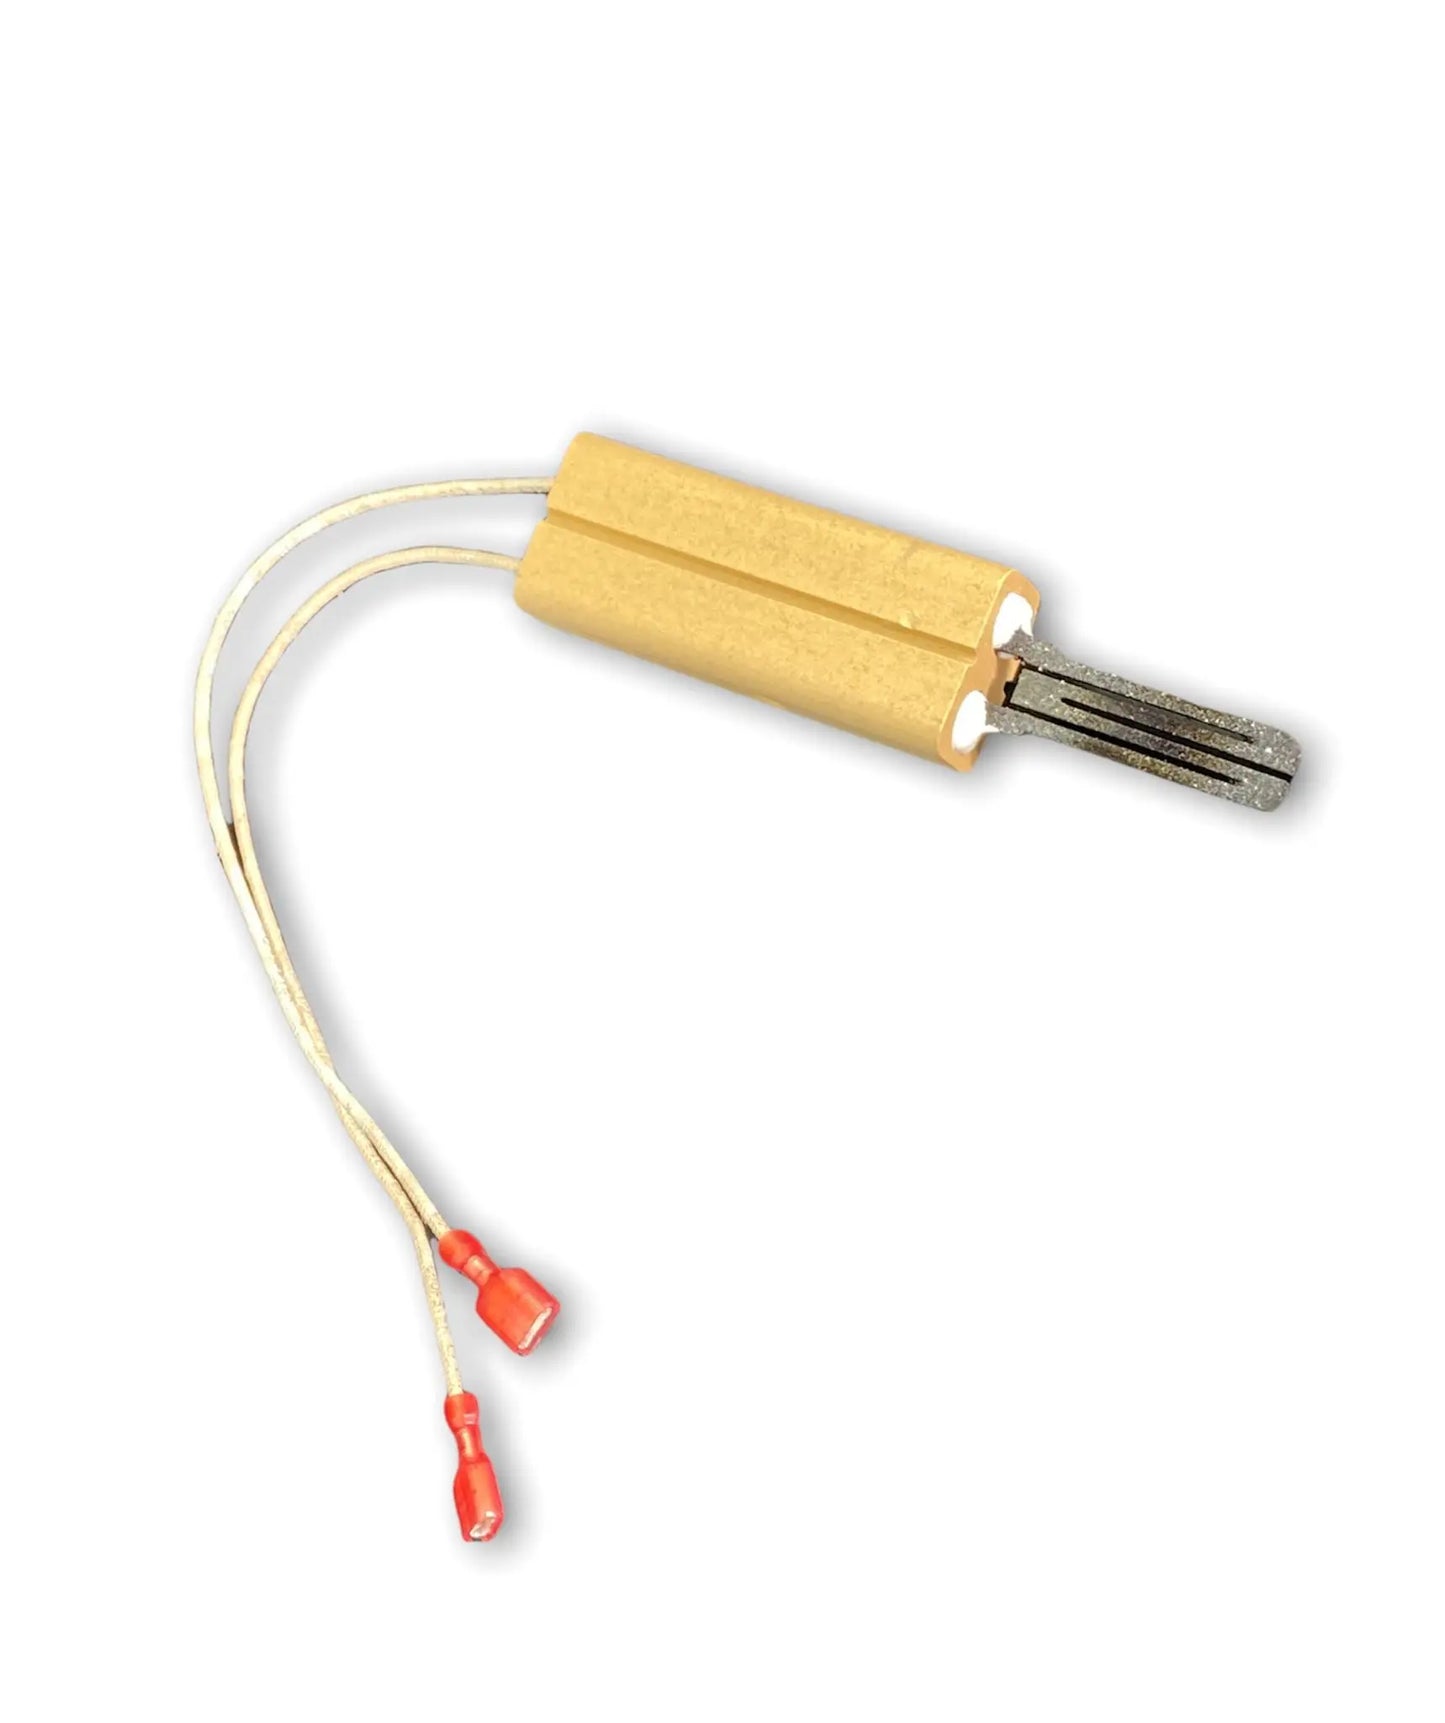 Bosch Range Flat Gas Igniter, Hot Surface - 00487242 or 487242,  REPLACES: 487242 00488049 00491375 15-10-136 35-00-189 488049 491375 1014017 AP2836973 PS8720933 EAP8720933 PD00043985 INVERTEC